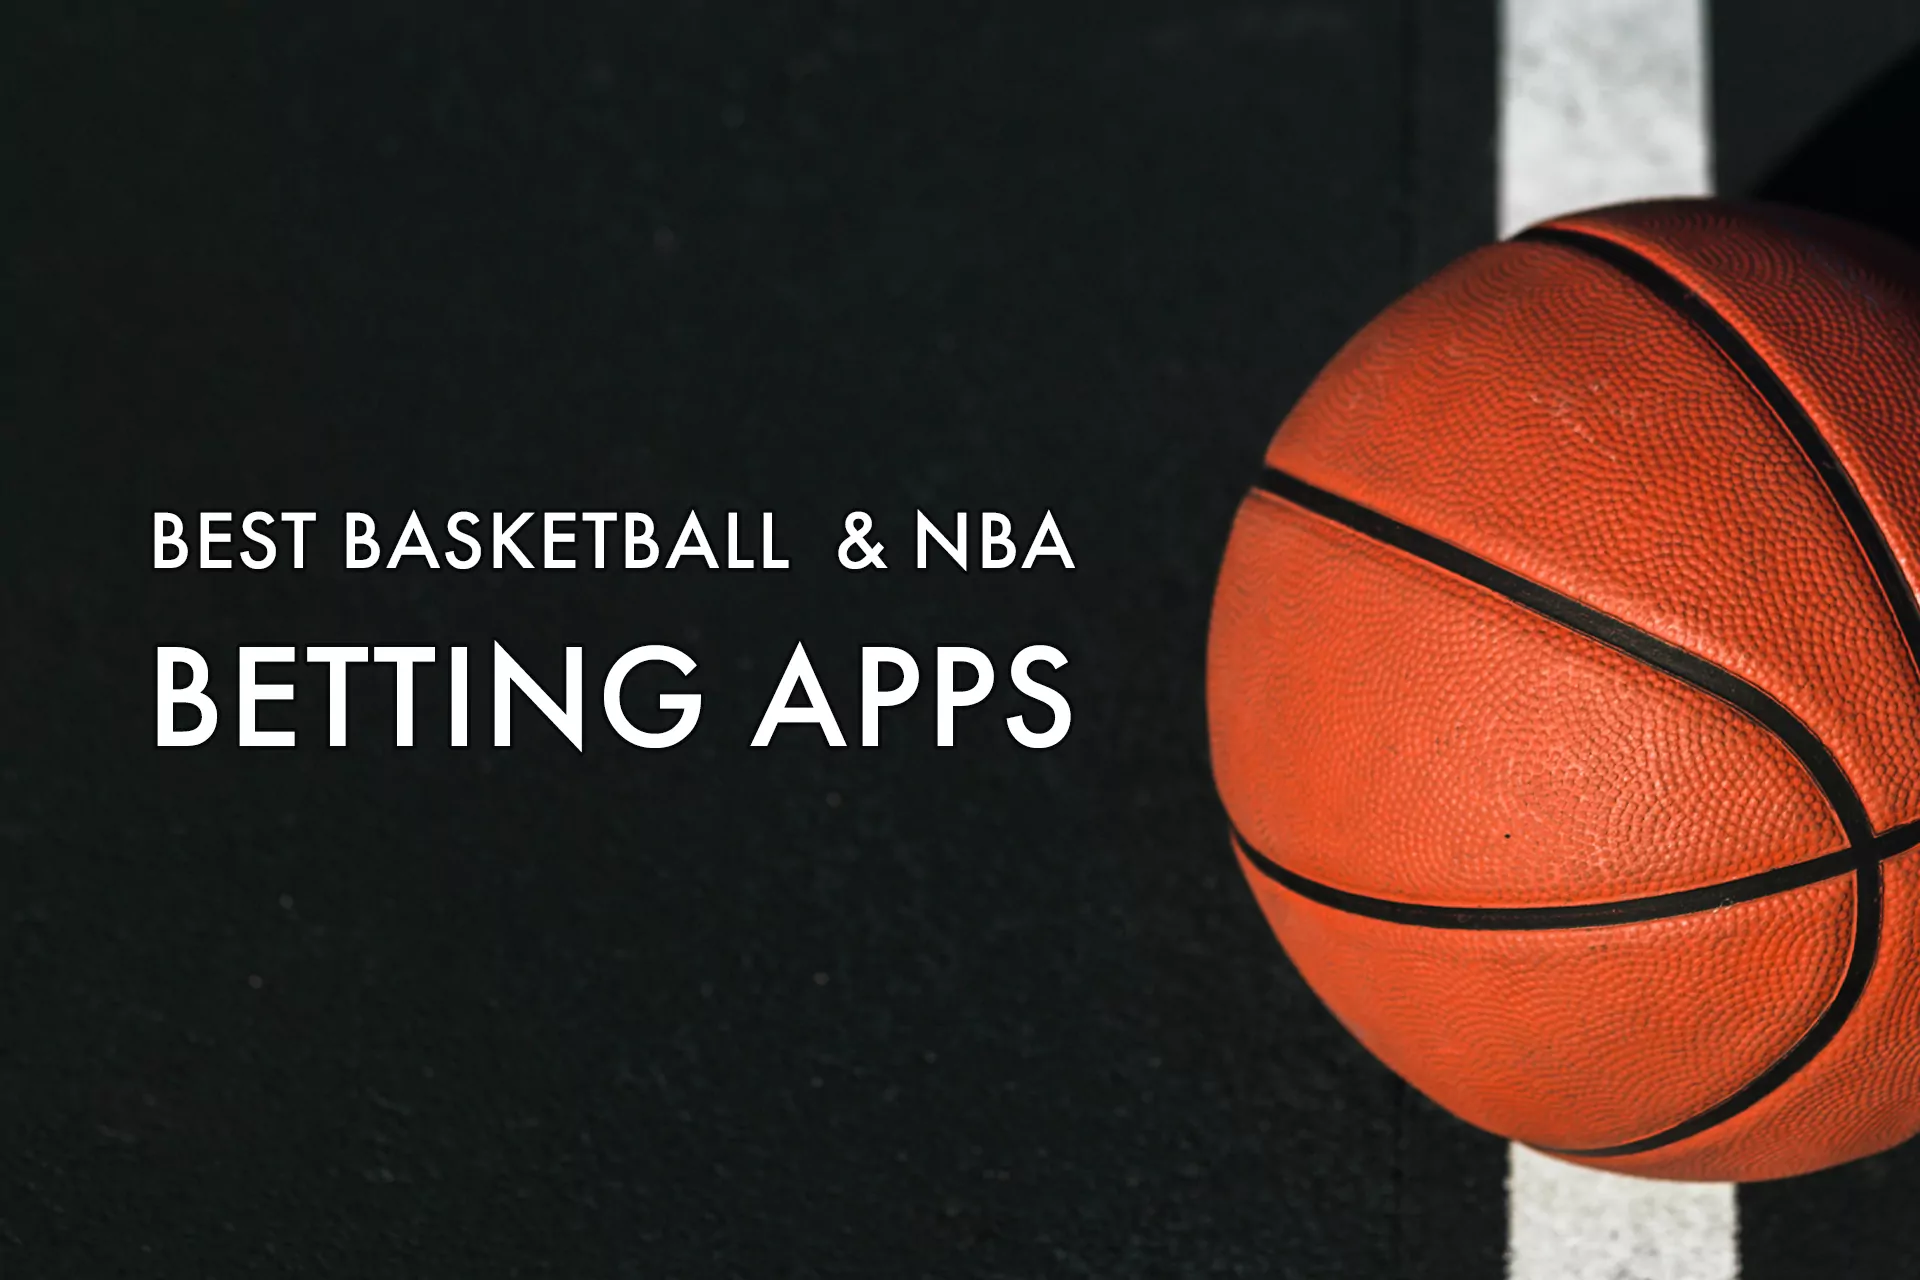 Users who prefer placing bets on basketball matches, usually choose apps from this list.